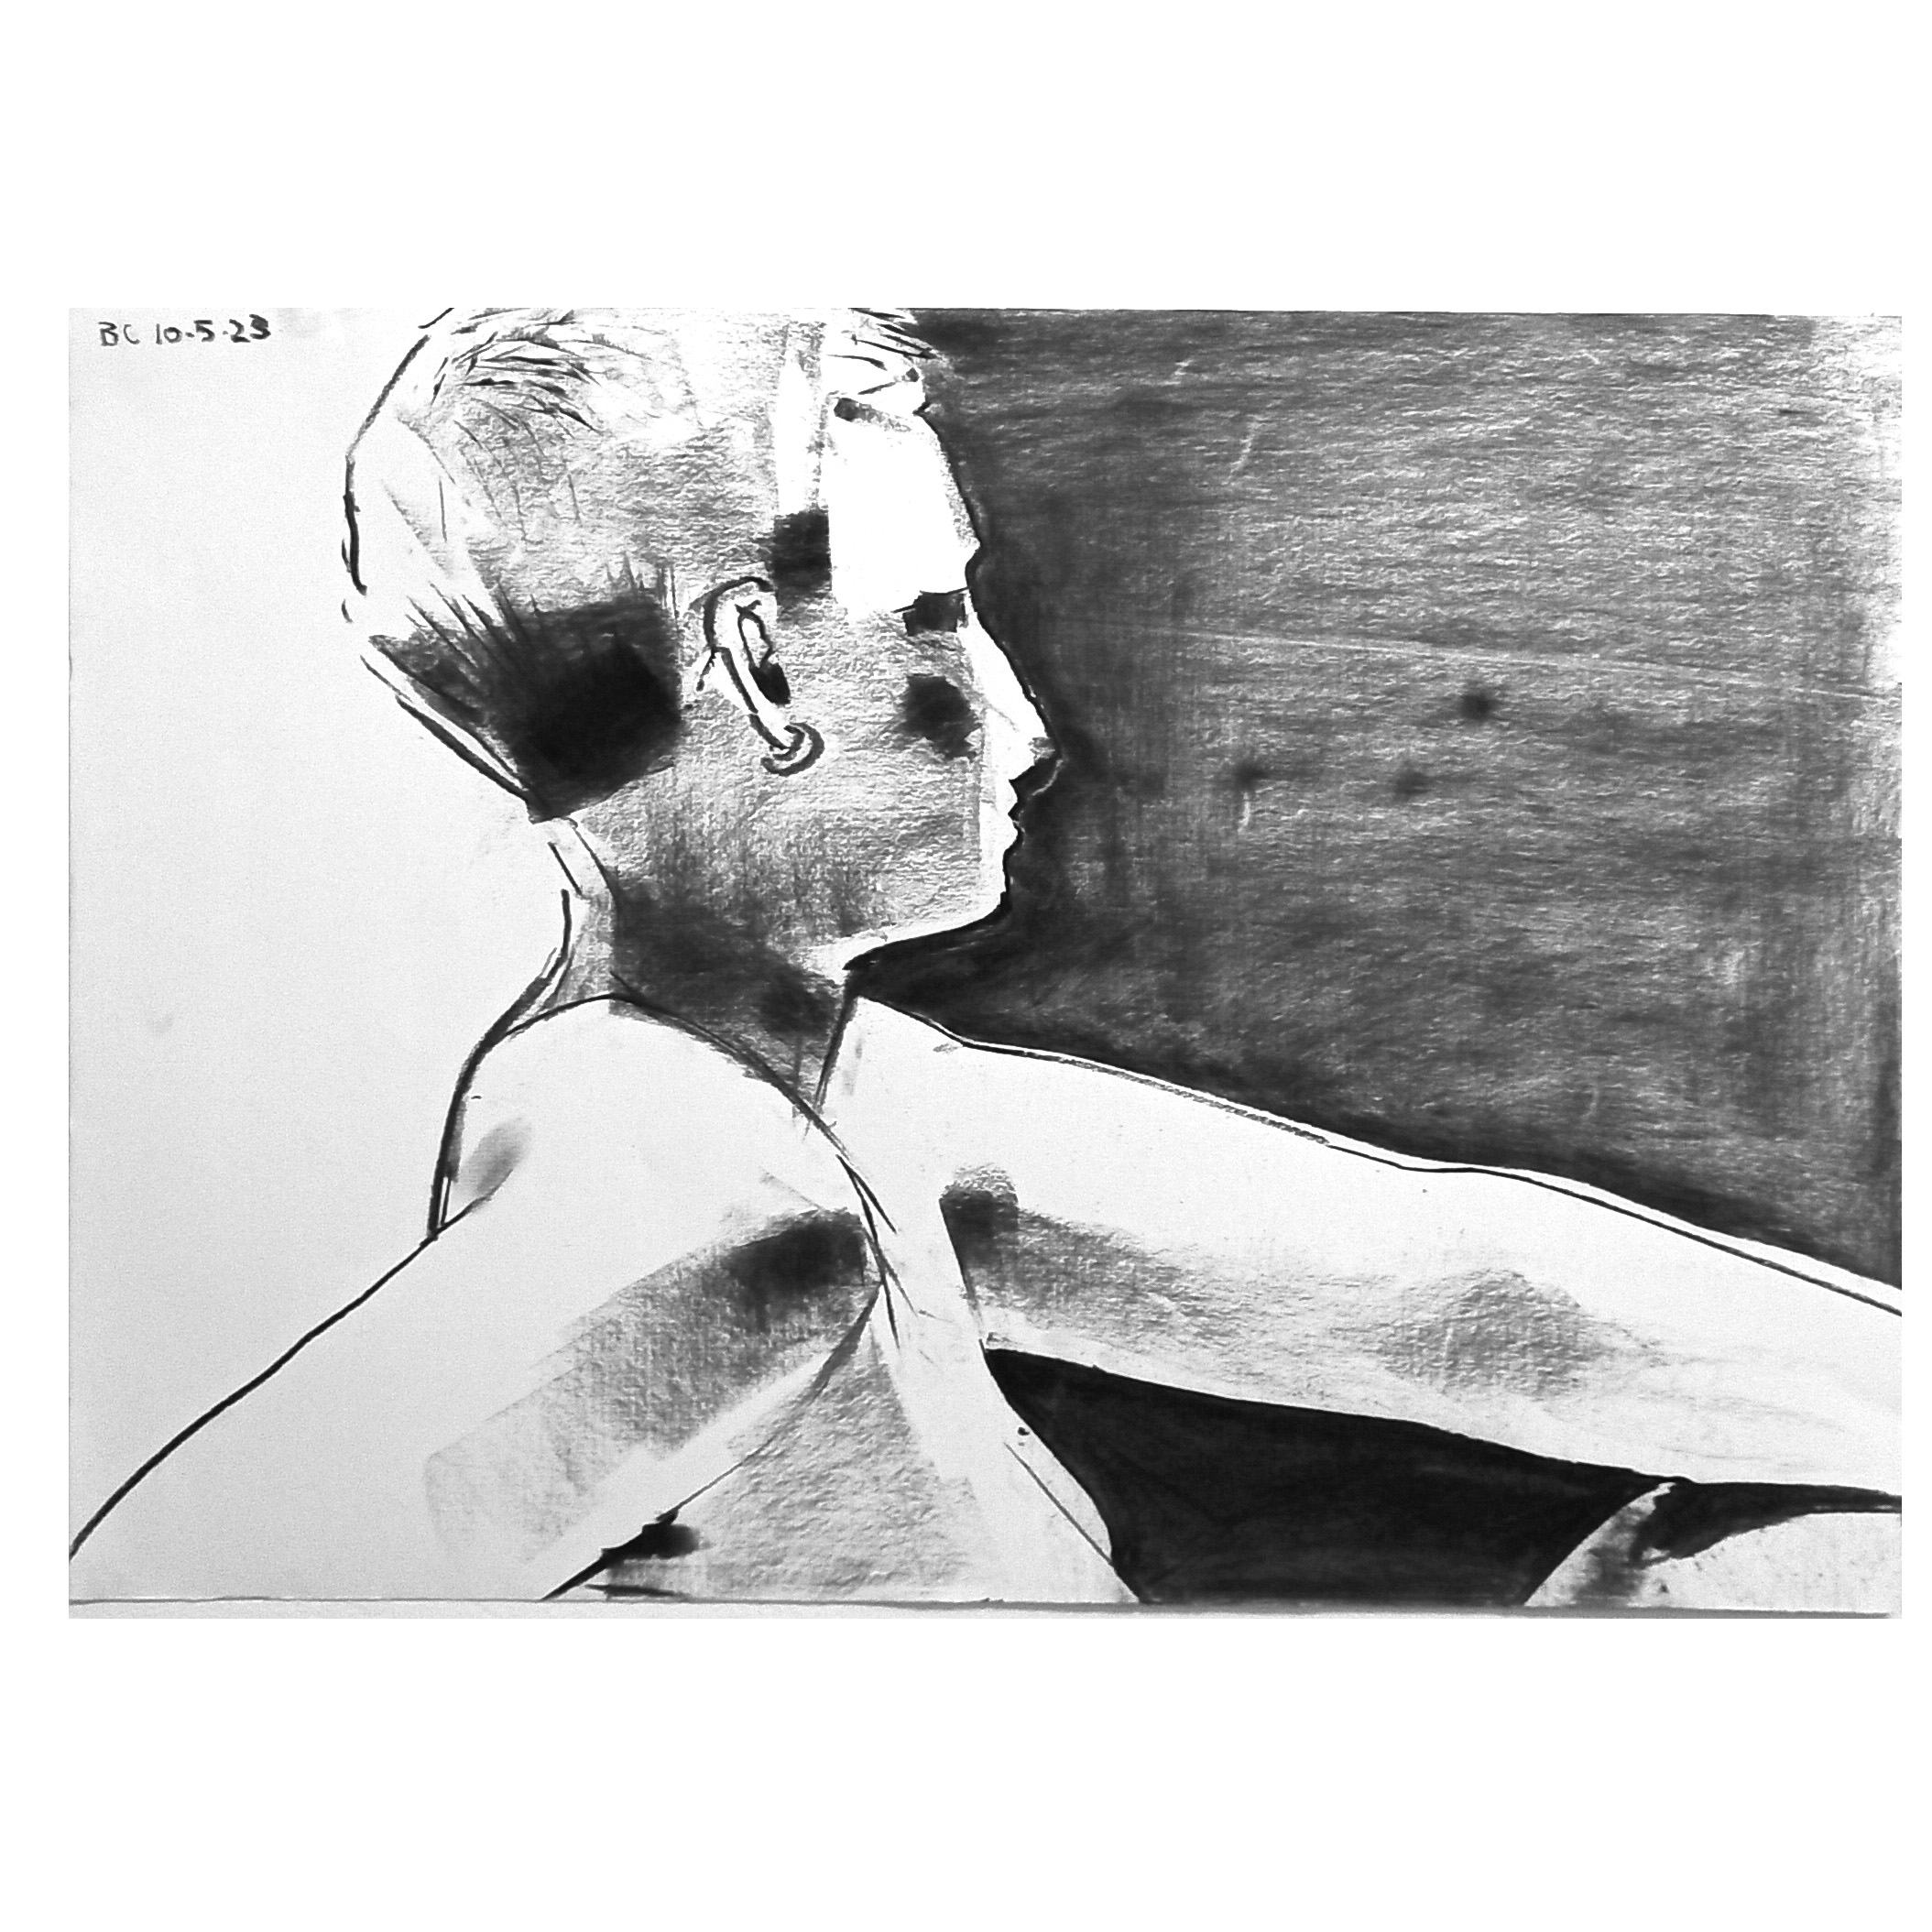 Charcoal life drawing by Ben Crappsley